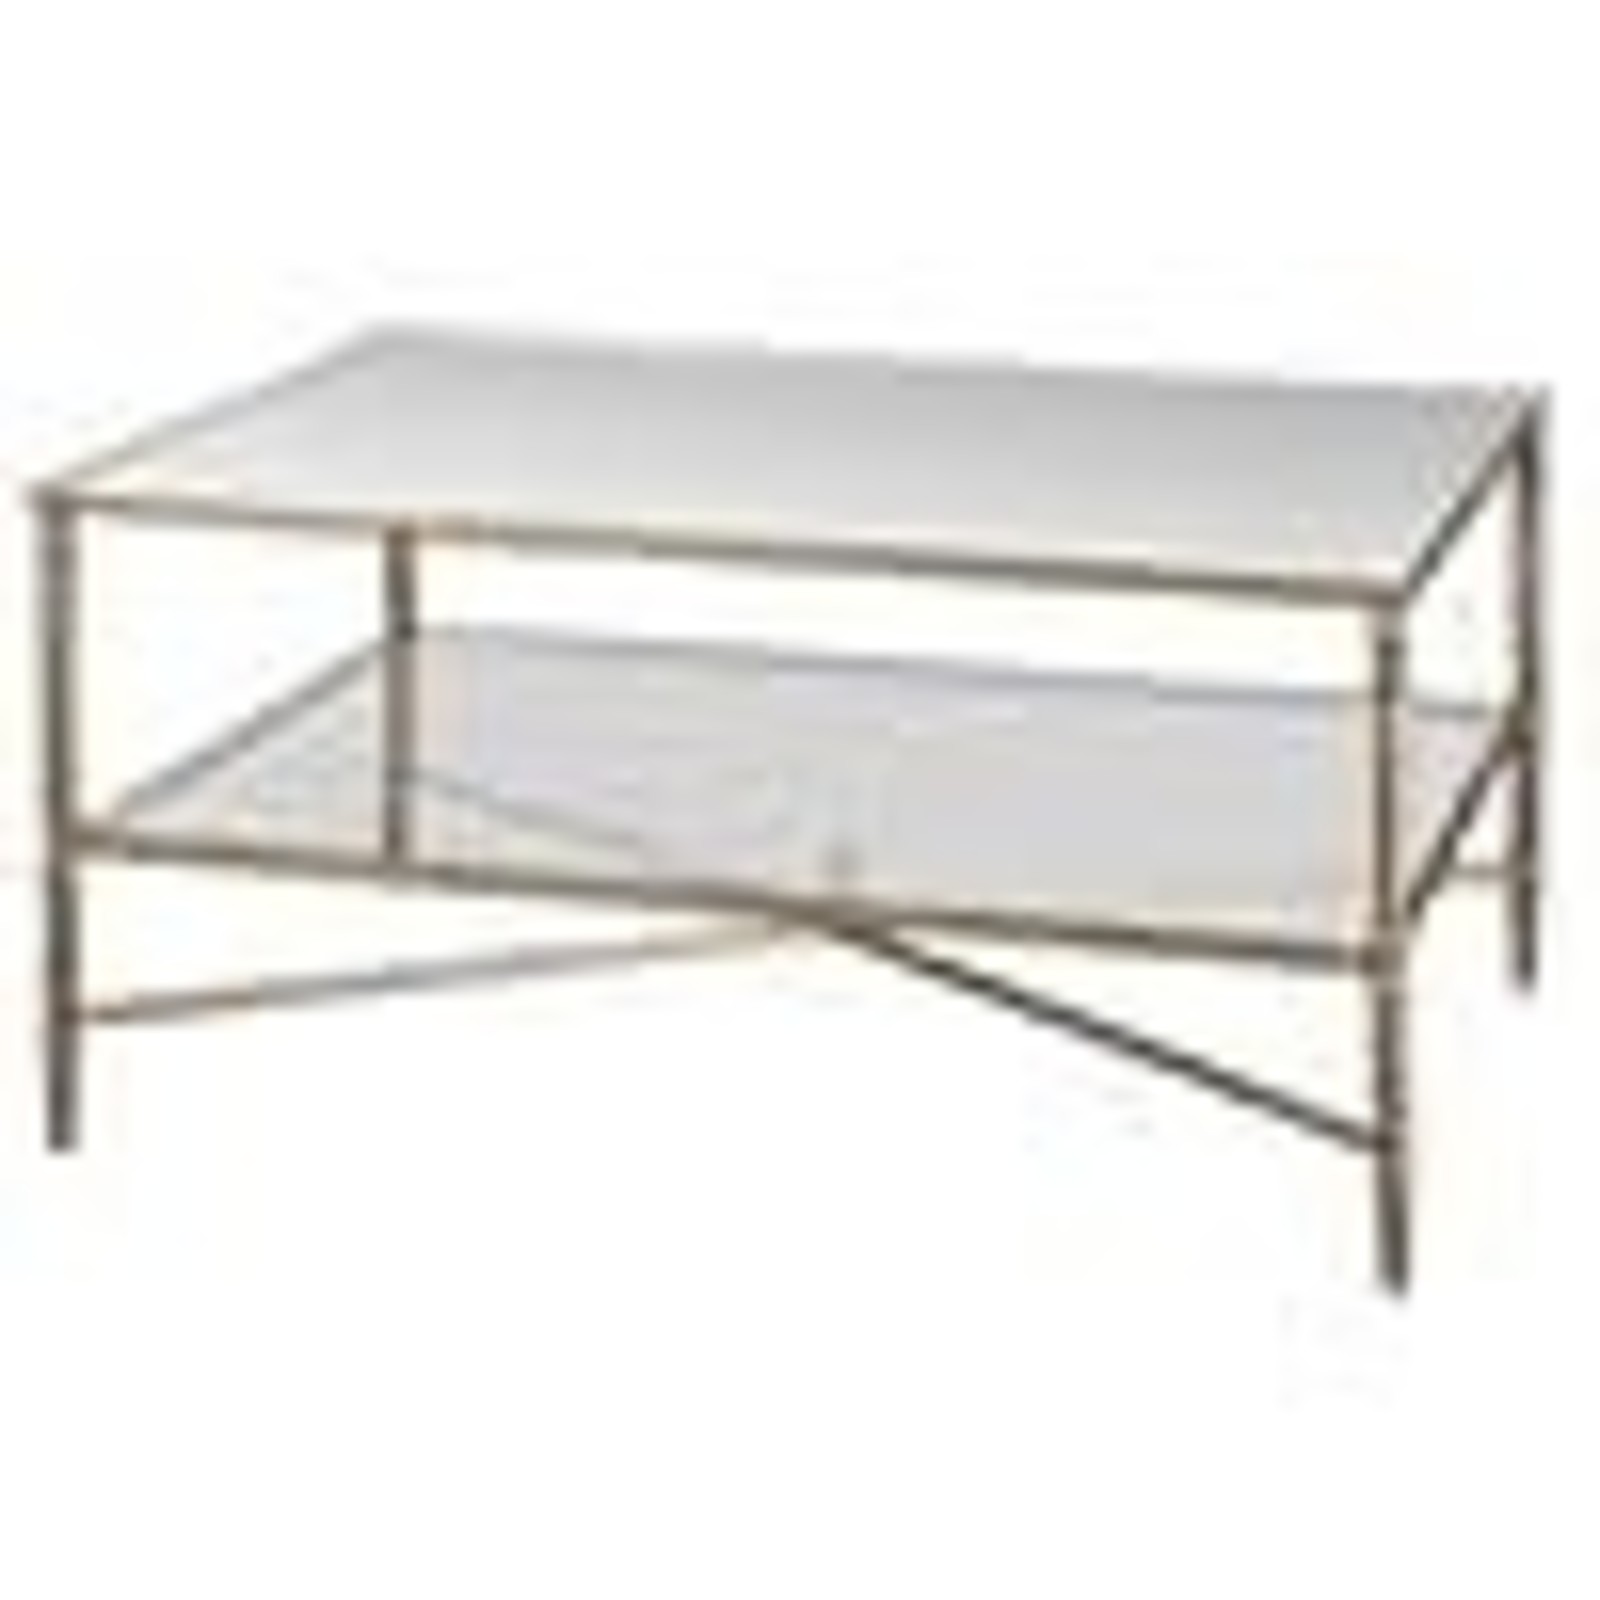 Uttermost HENZLER COFFEE TABLE   24276 loading=